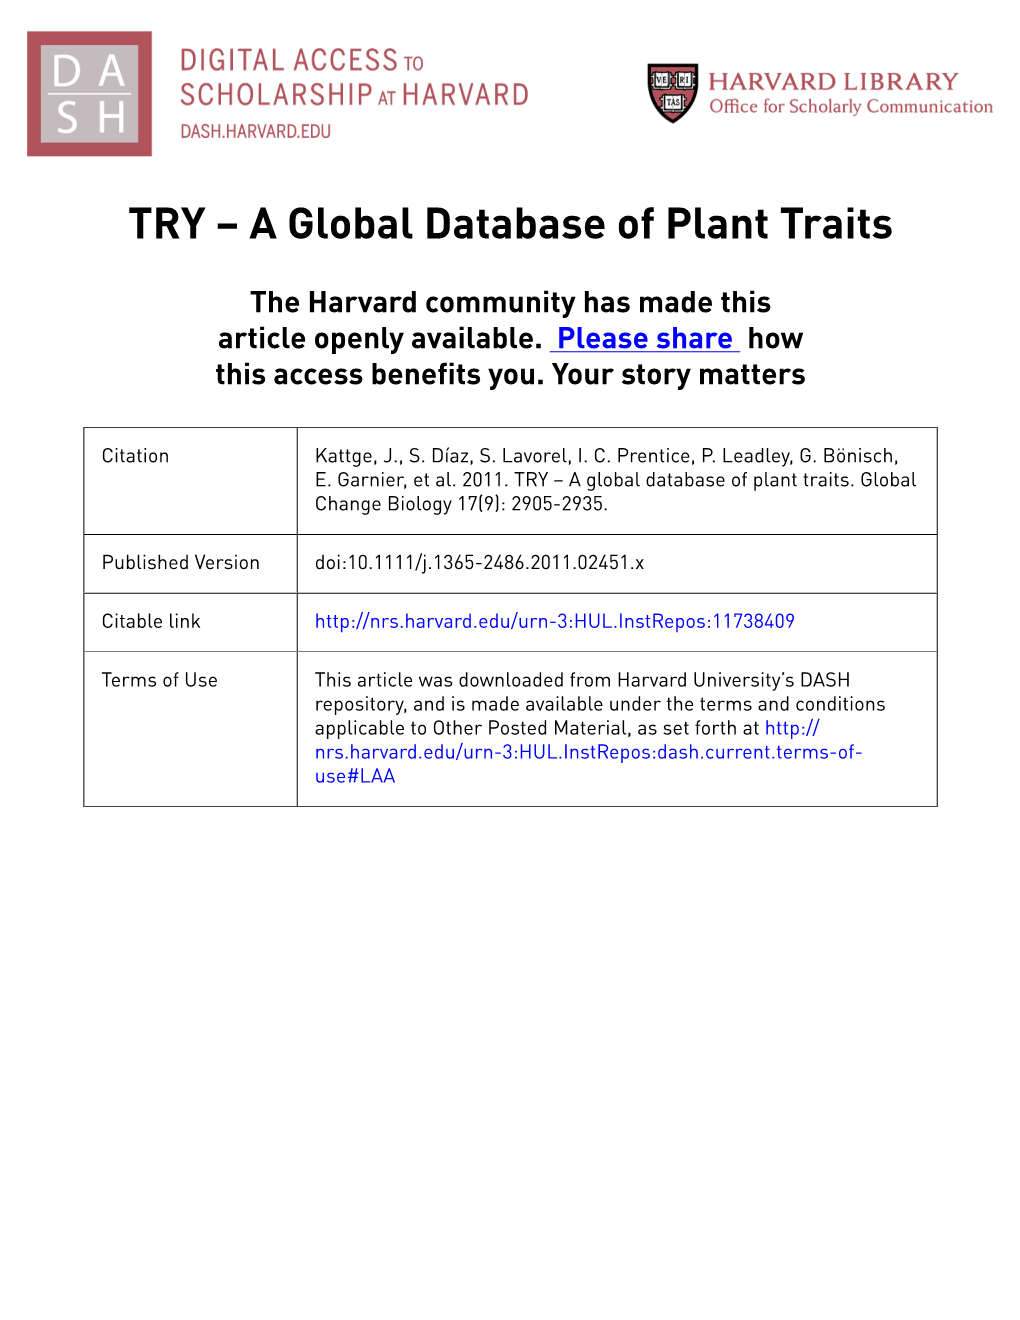 TRY a Global Database of Plant Traits